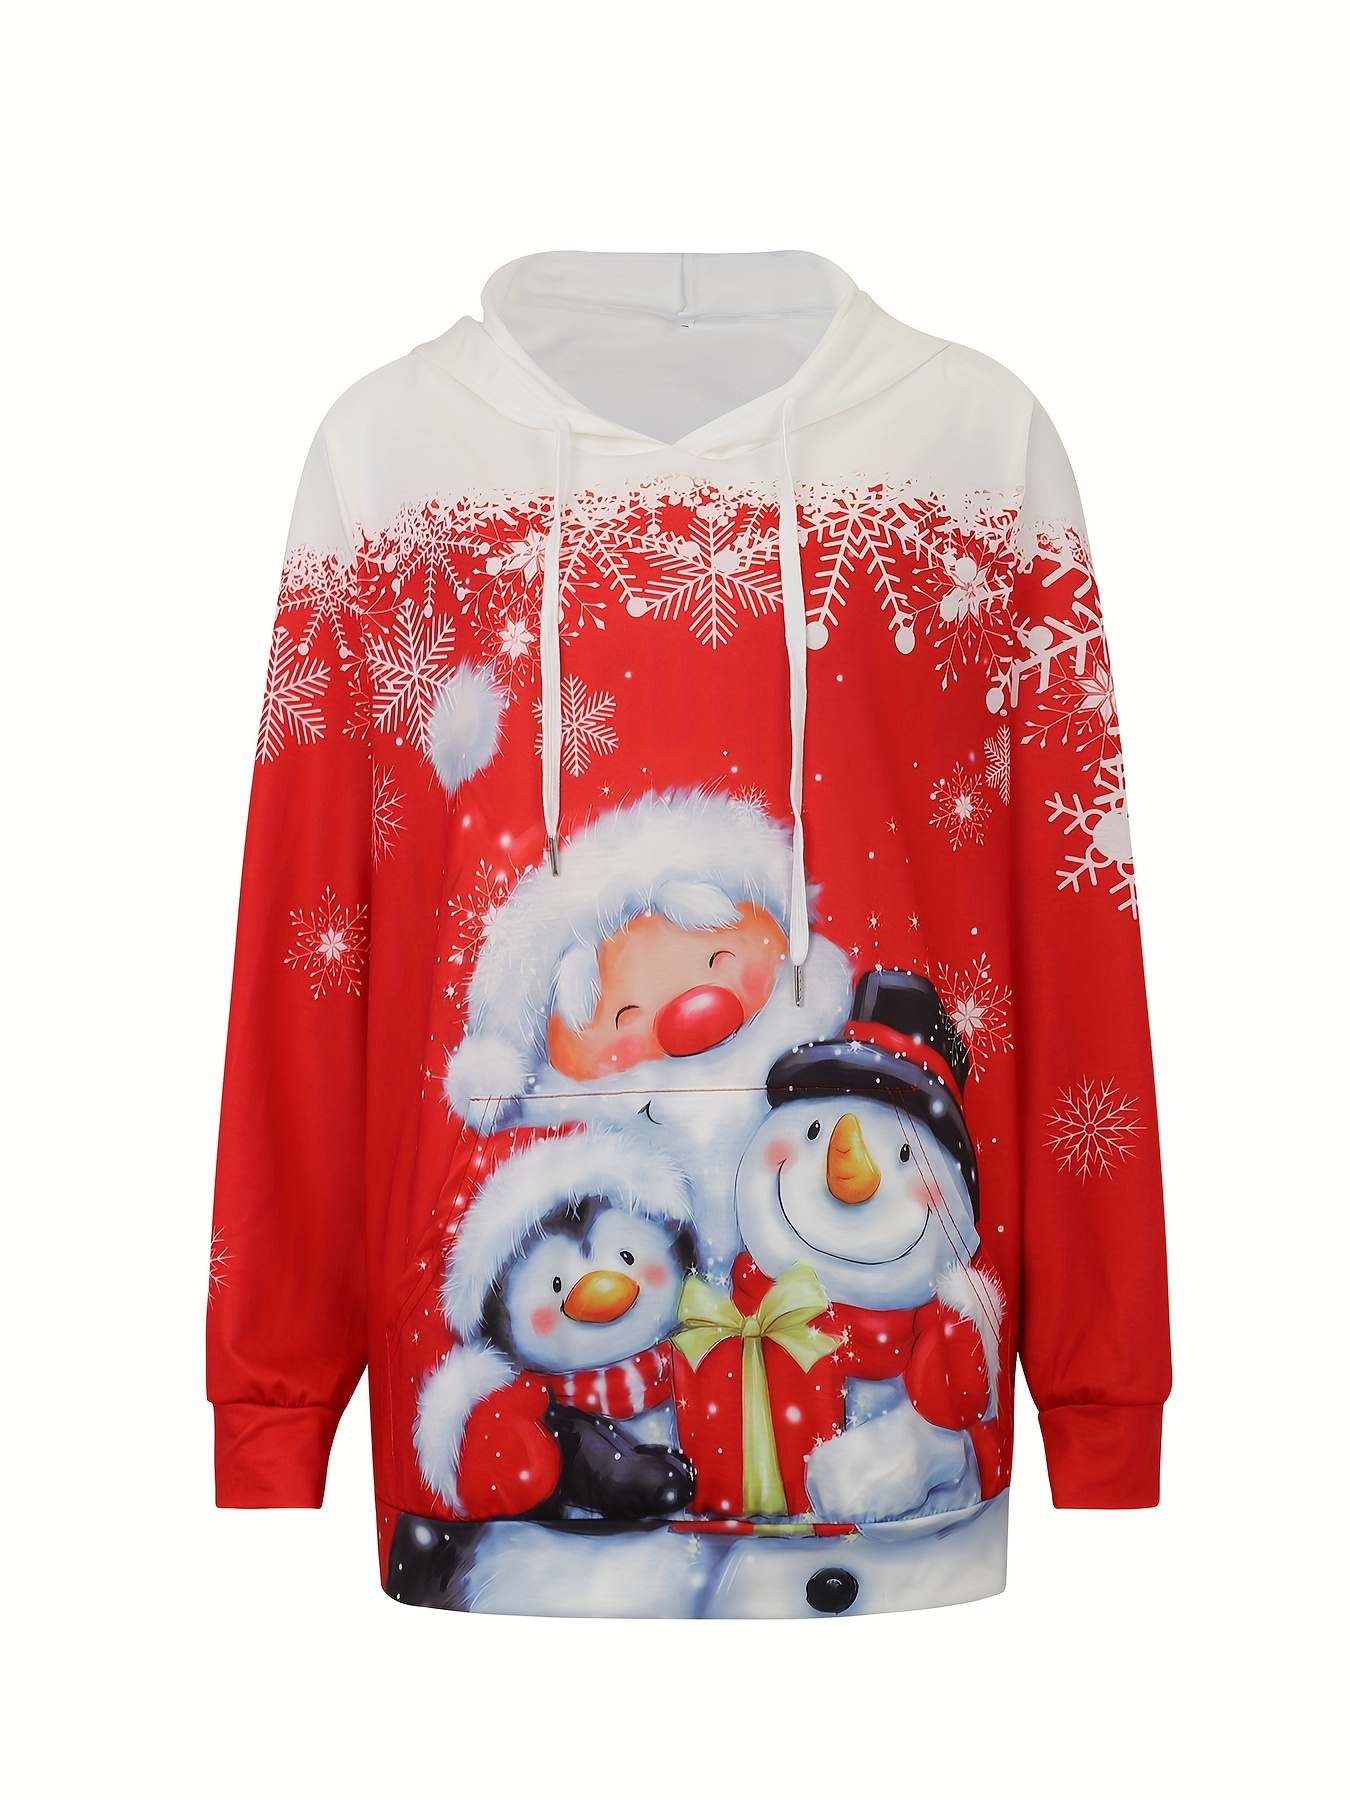 Christmas Hoodie Tops for Women Cute Snowman Print Pullover Plus Size  Casual Fashion Xmas Graphic Hooded Sweatshirts 